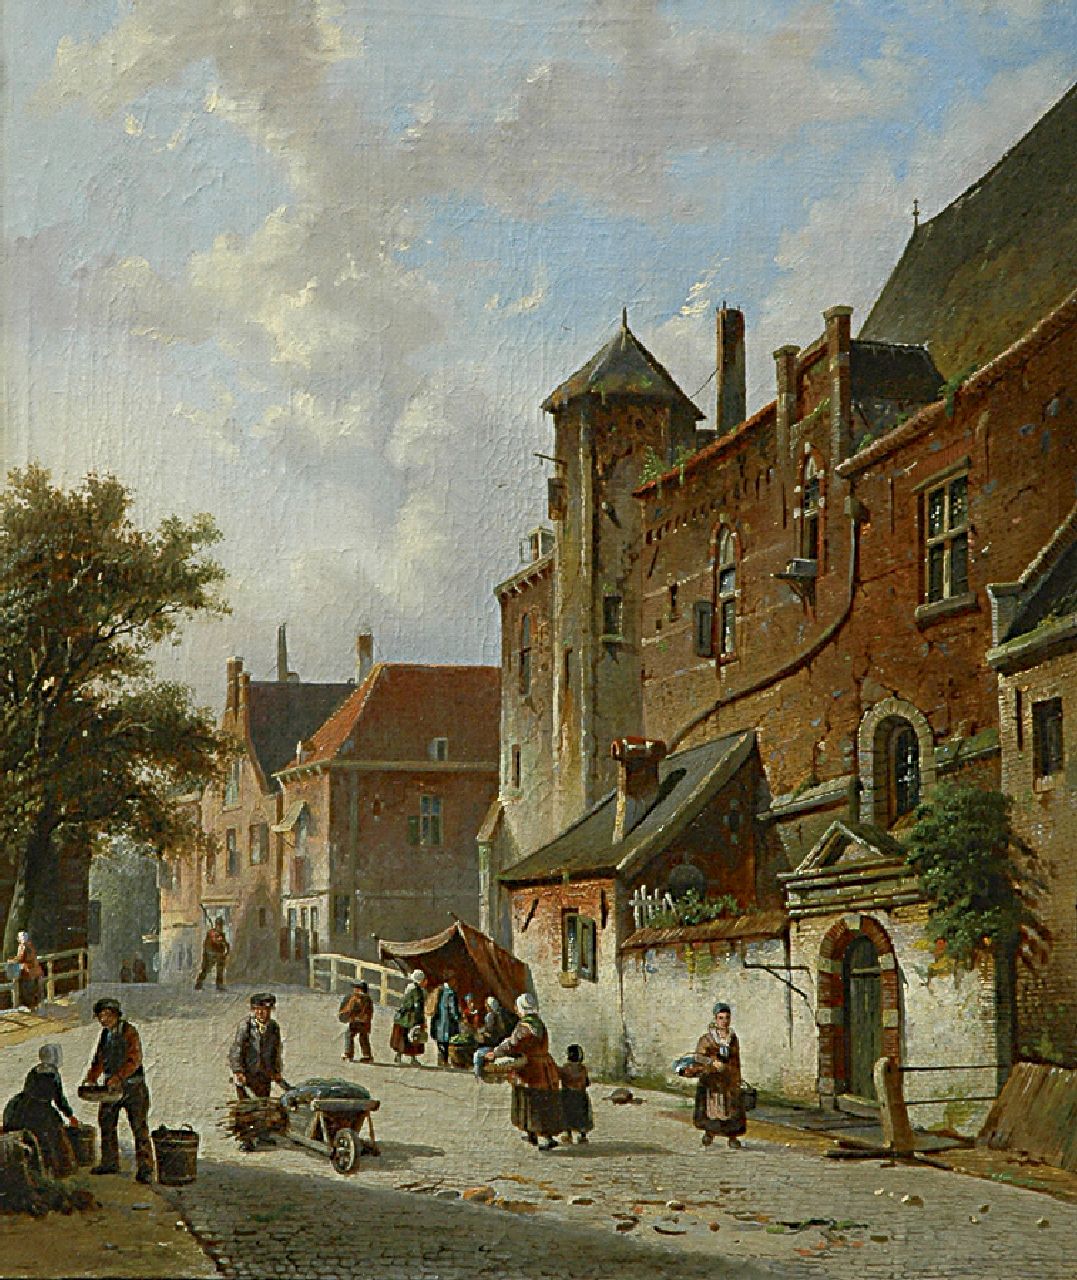 Roosdorp F.  | Frederik Roosdorp, Figures on the street in a Dutch town, oil on canvas 54.0 x 46.0 cm